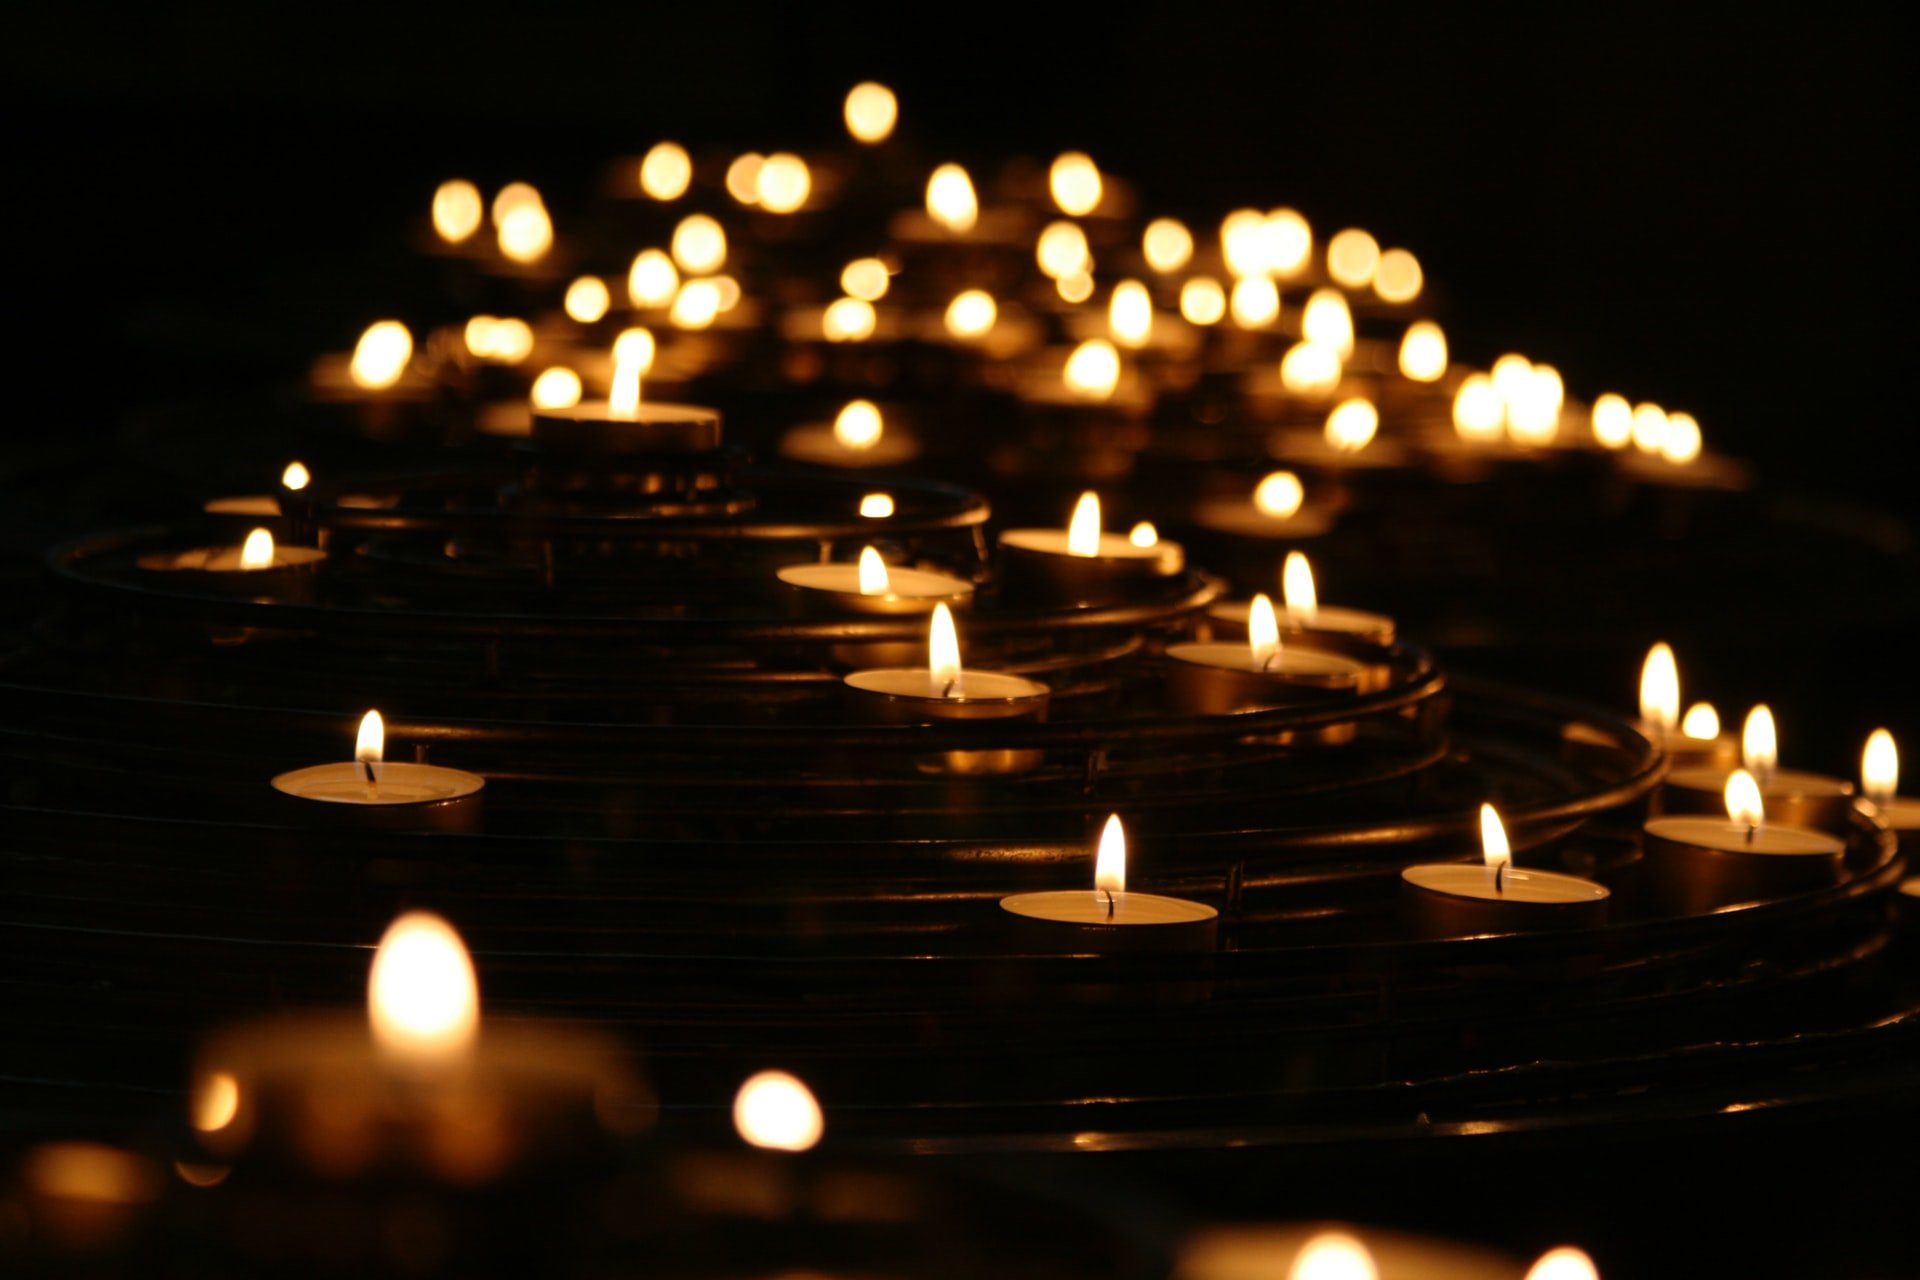 Photograph of candles in dark water, ripples surrounding